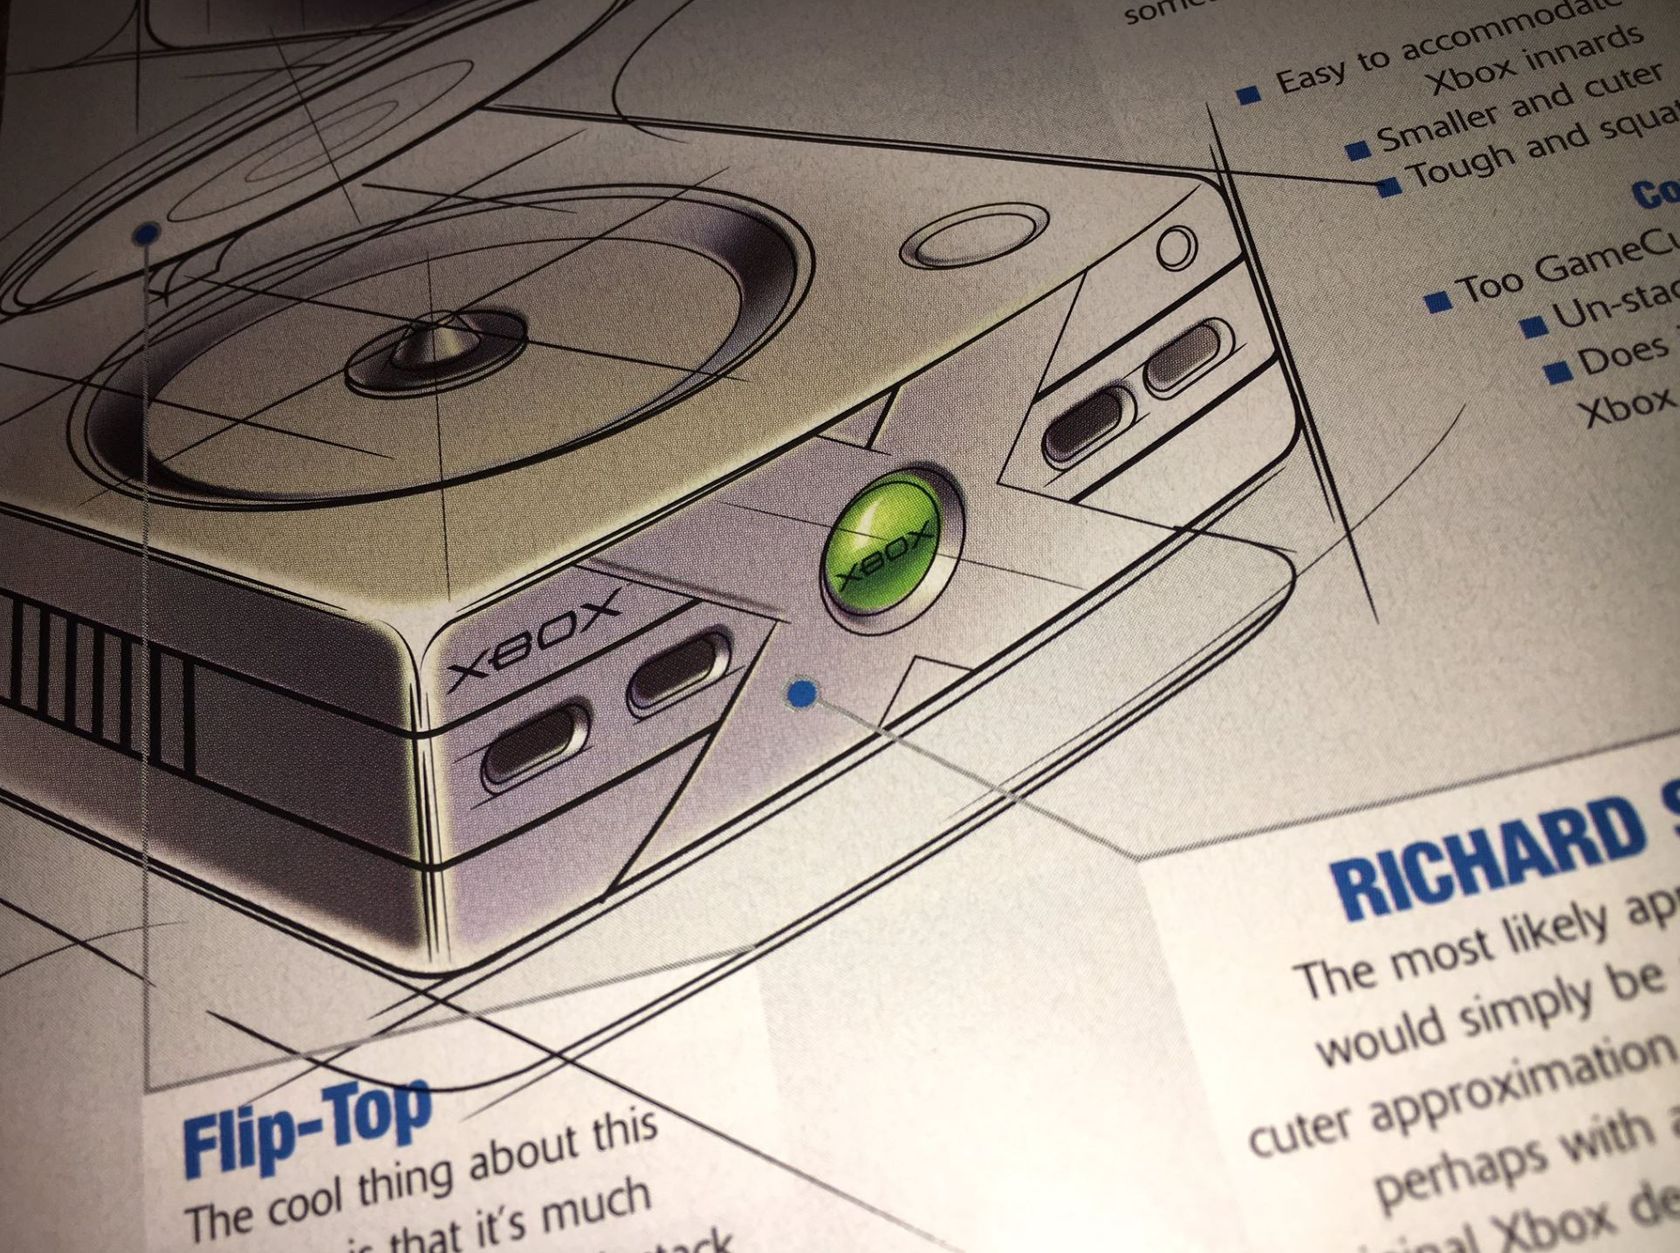 20 Facts You Never Knew About The First Xbox